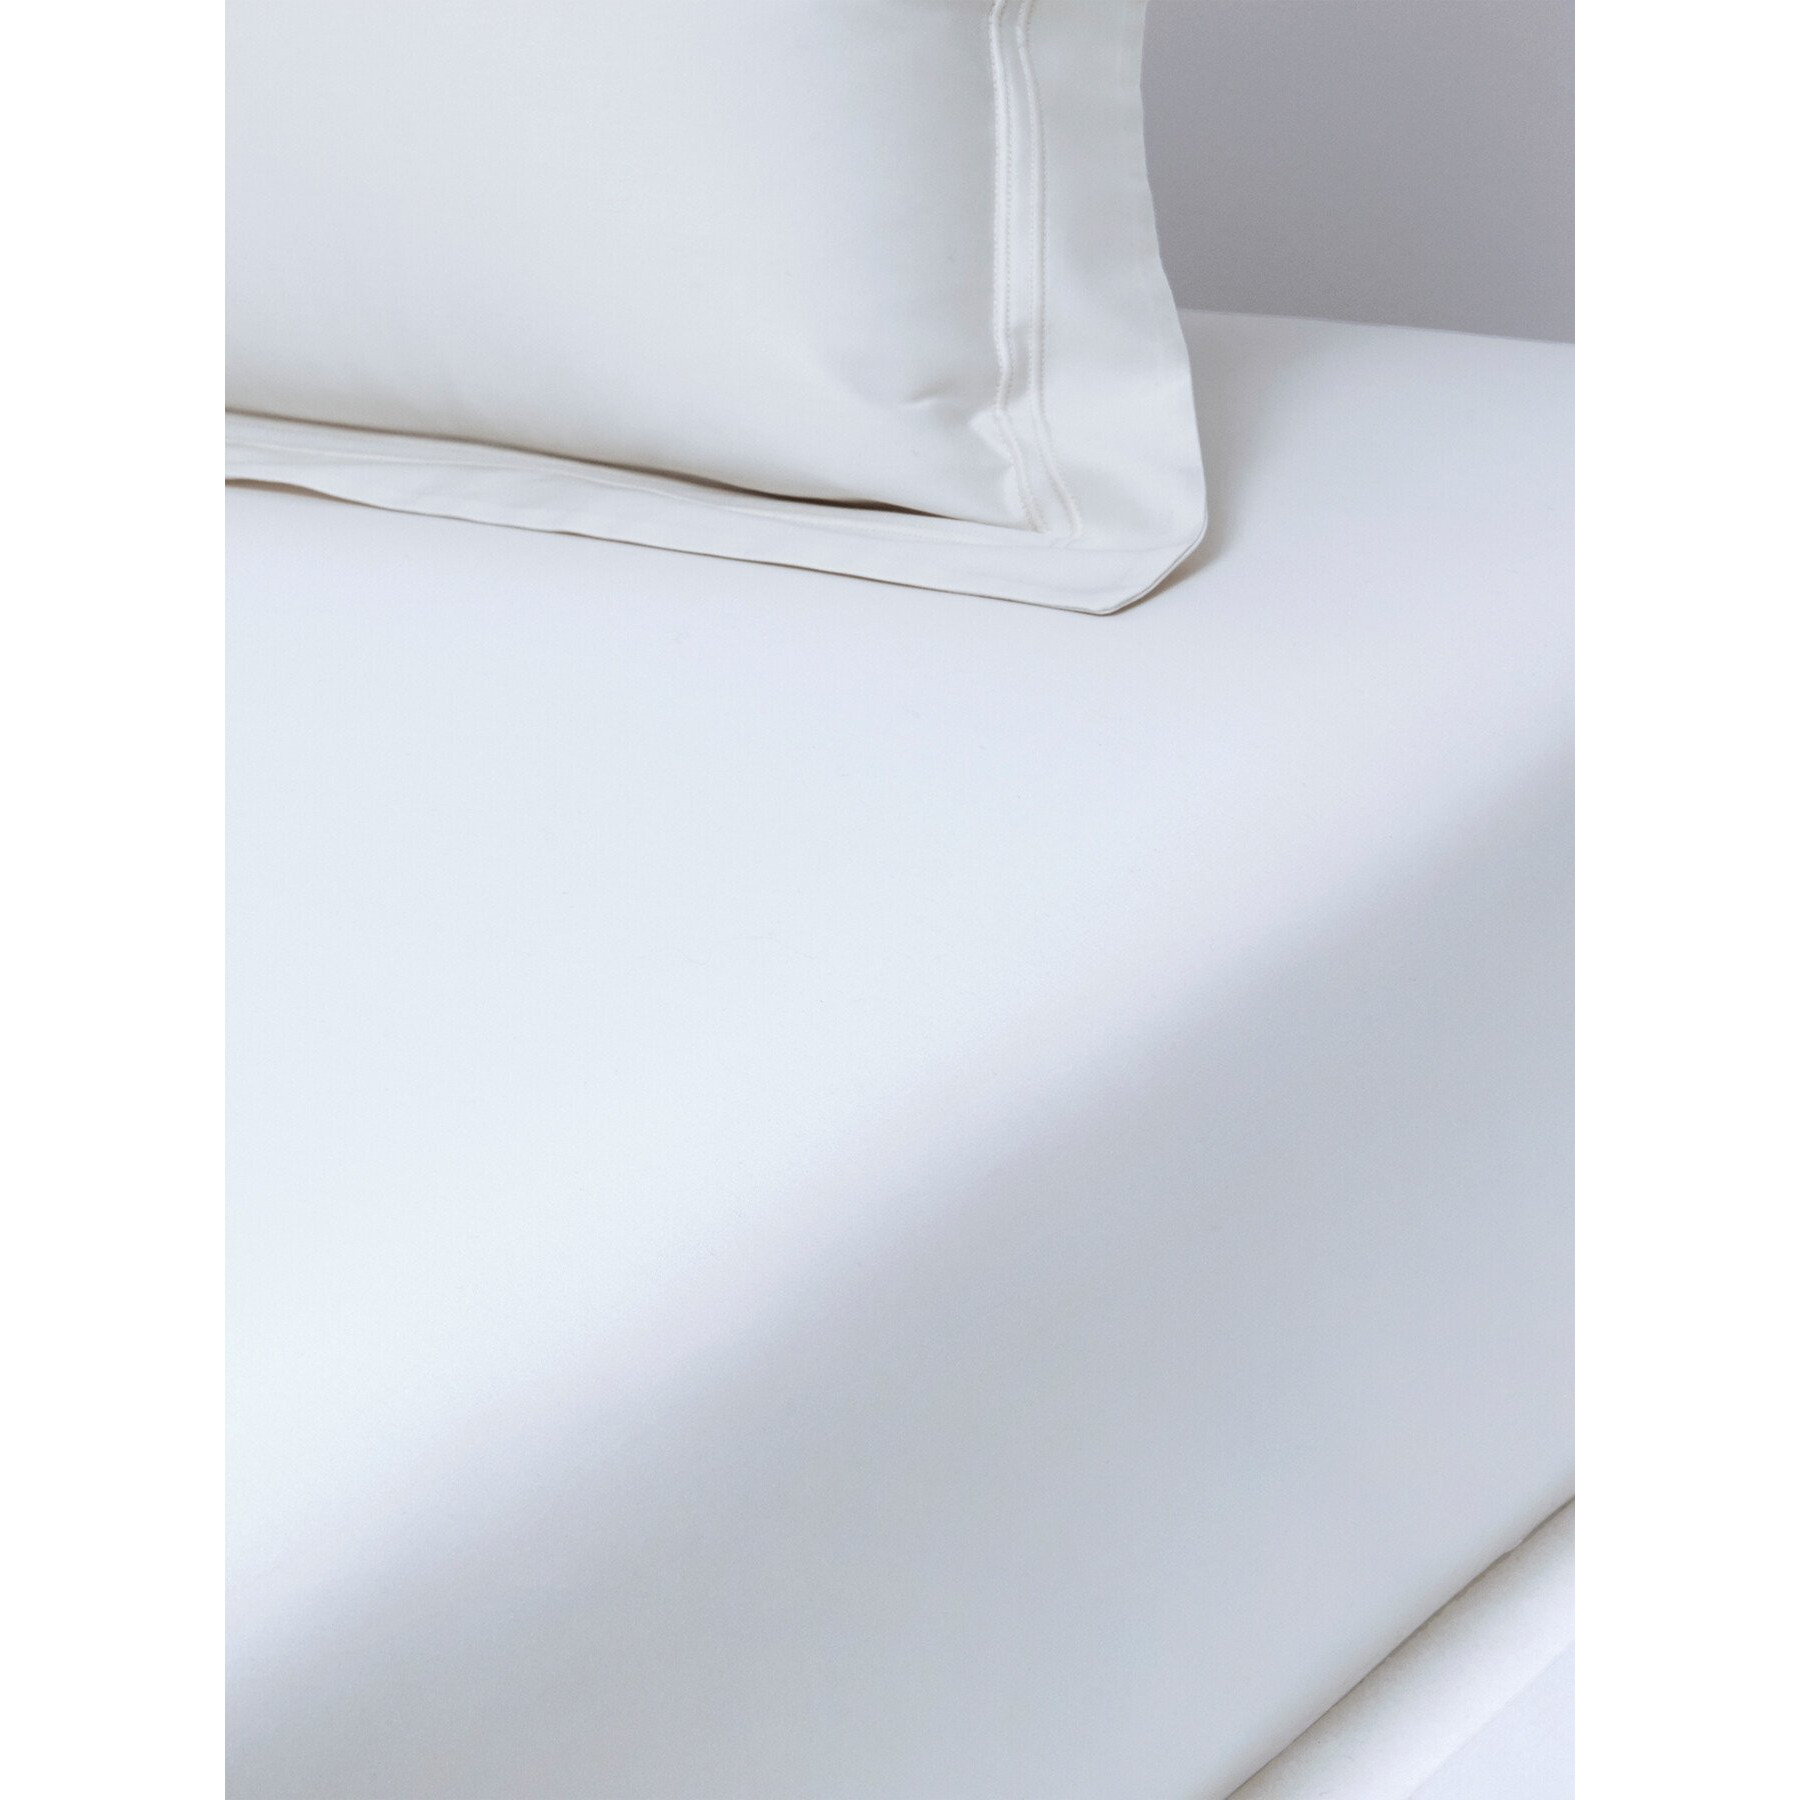 Yves Delorme Triomphe Fitted Sheet - Size King White - image 1